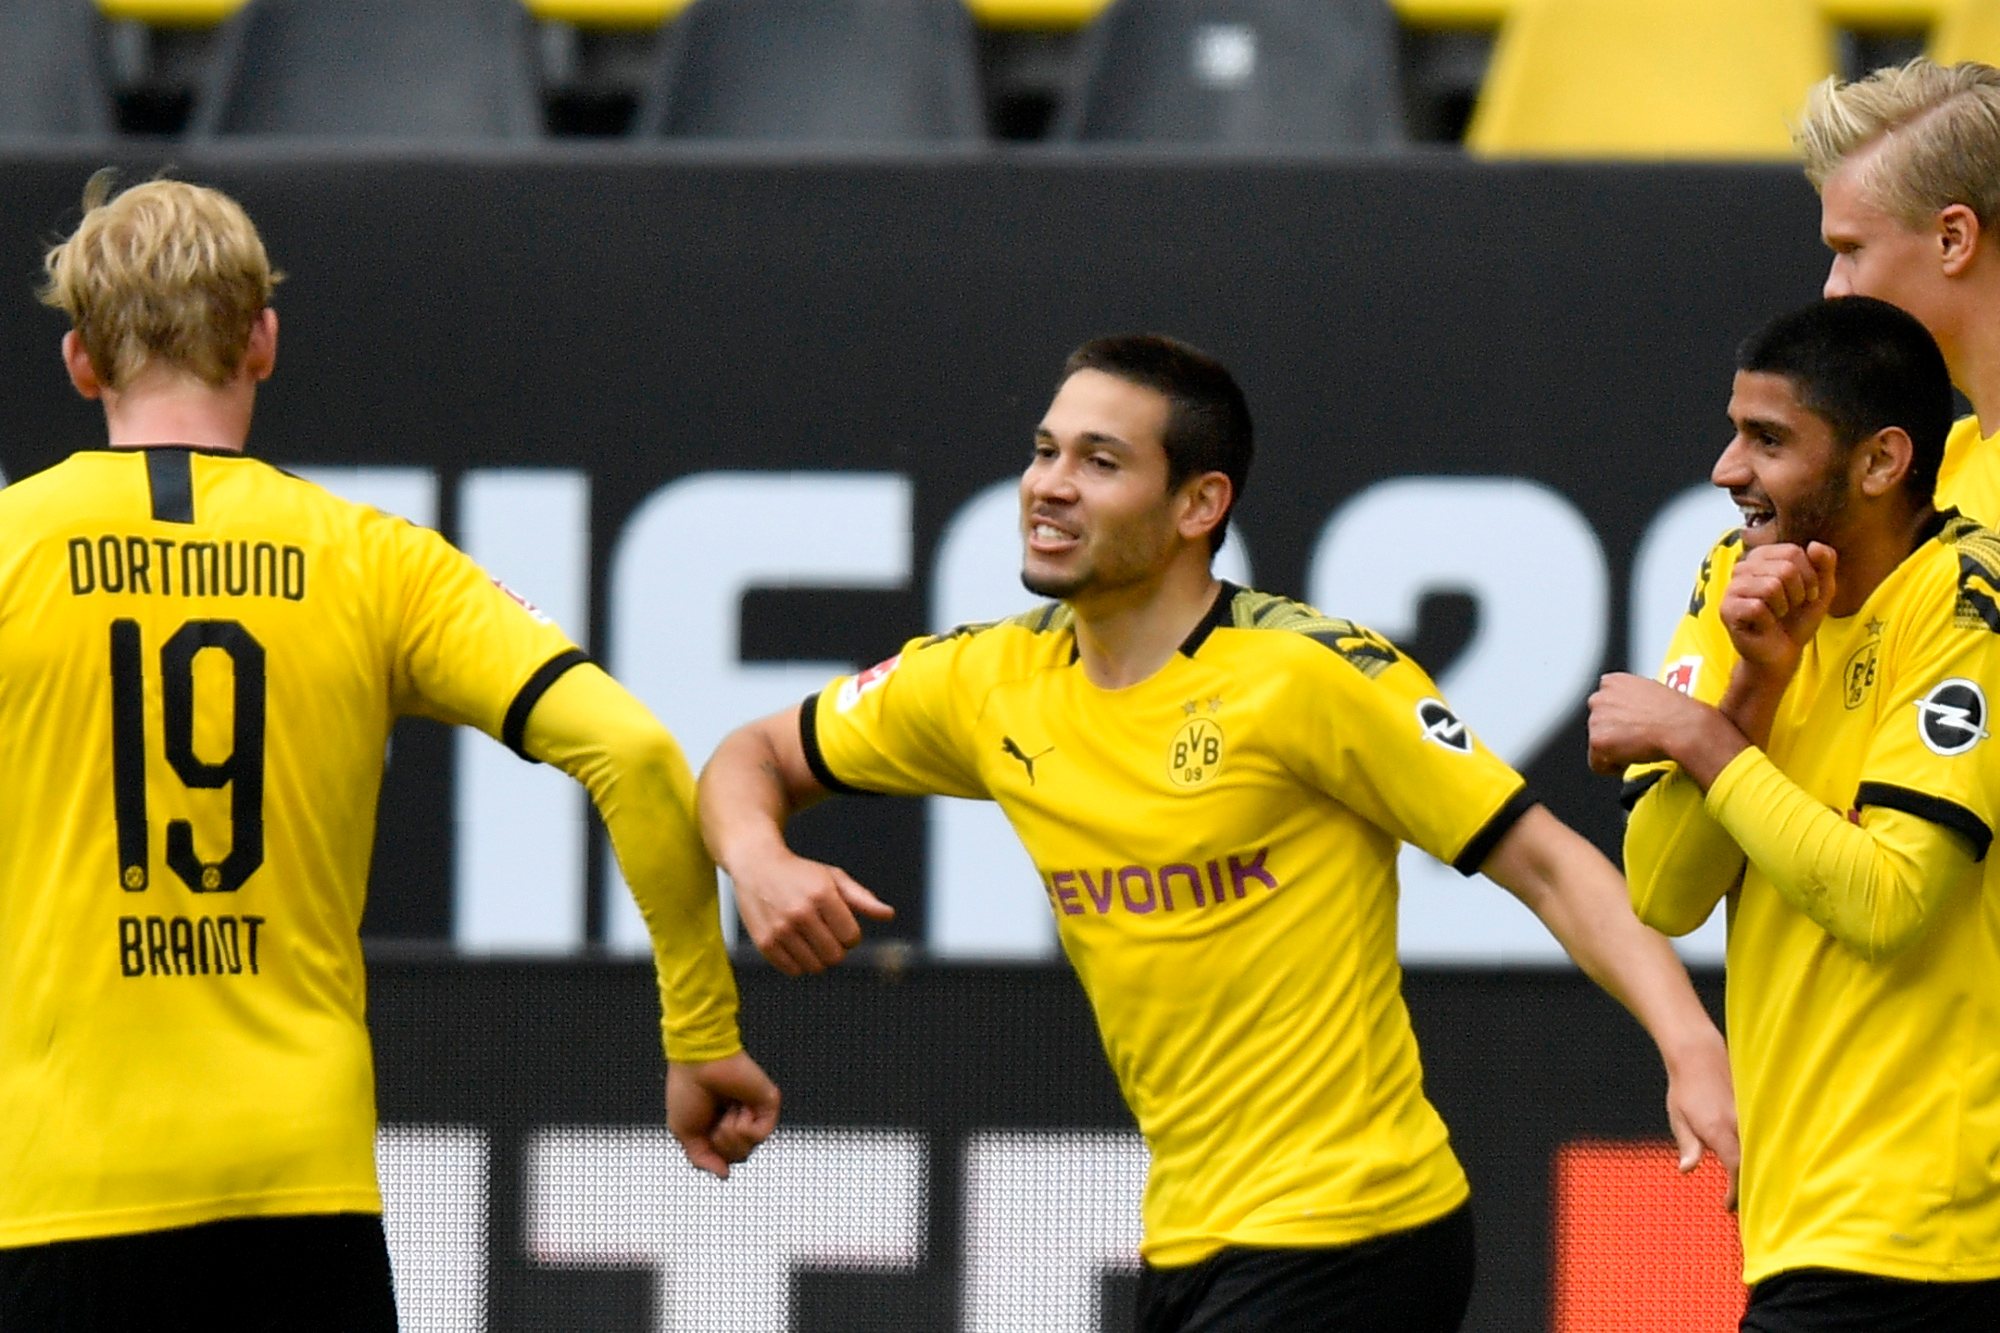 epa08426000 Dortmund&#039;s Raphael Guerreiro (C) celebrates with Julian Brandt (L) after scoring the 2-0 lead during the German Bundesliga soccer match between Borussia Dortmund and Schalke 04 in Dortmund, Germany, 16 May 2020. The German Bundesliga and Second Bundesliga are the first professional leagues to resume the season after the nationwide lockdown due to the ongoing Coronavirus (COVID-19) pandemic. All matches until the end of the season will be played behind closed doors.  EPA/MARTIN MEISSNER / POOL DFL regulations prohibit any use of photographs as image sequences and/or quasi-video.